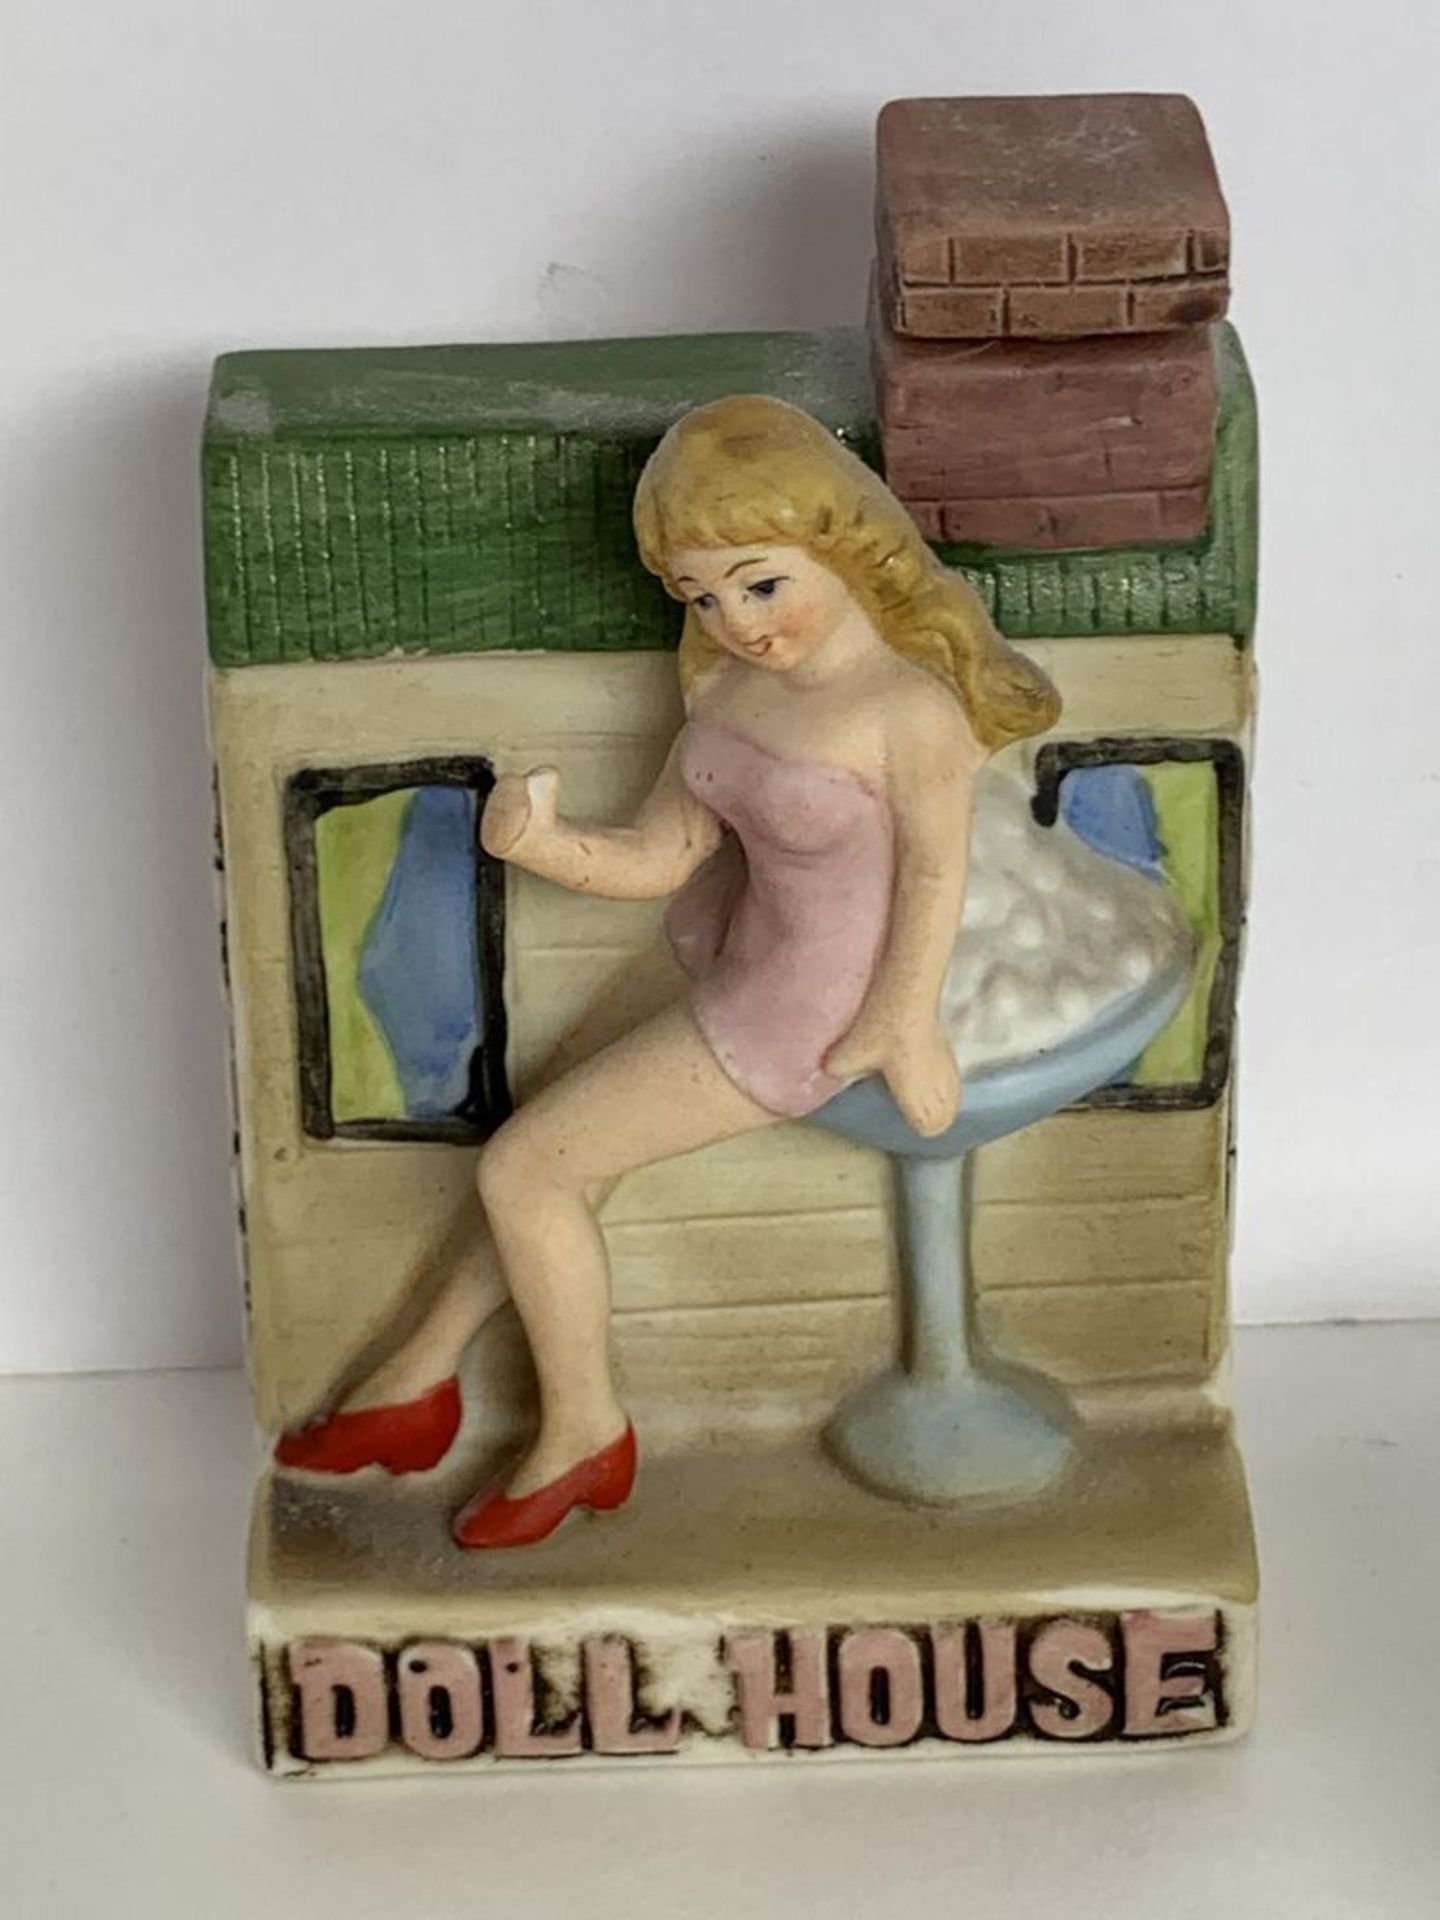 Mixed lot of Antique Decor items, Shot glasses and Hawthorne Doll House Figure - Image 2 of 5